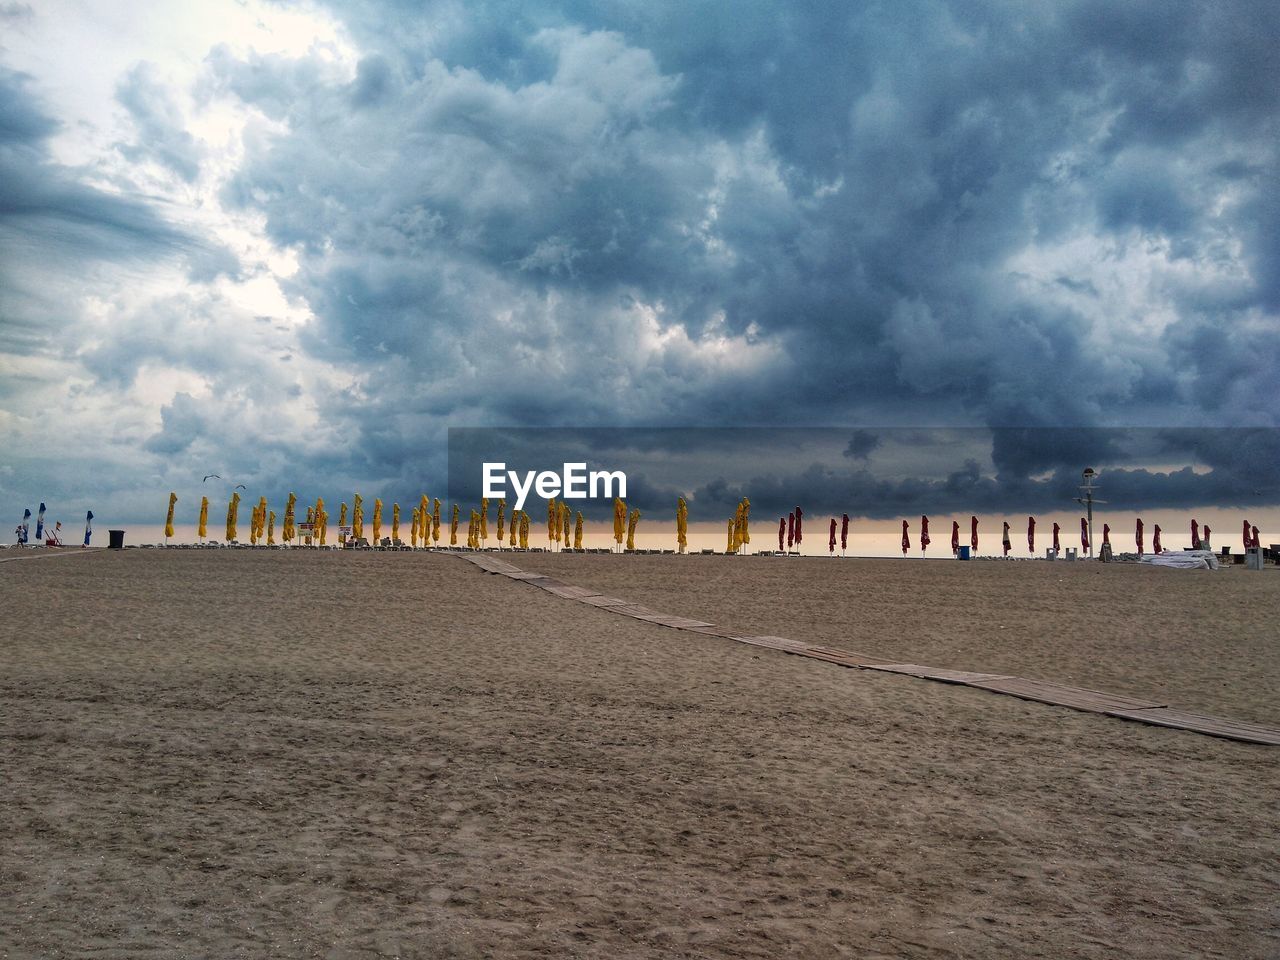 Distant view of closed parasols at beach against storm clouds